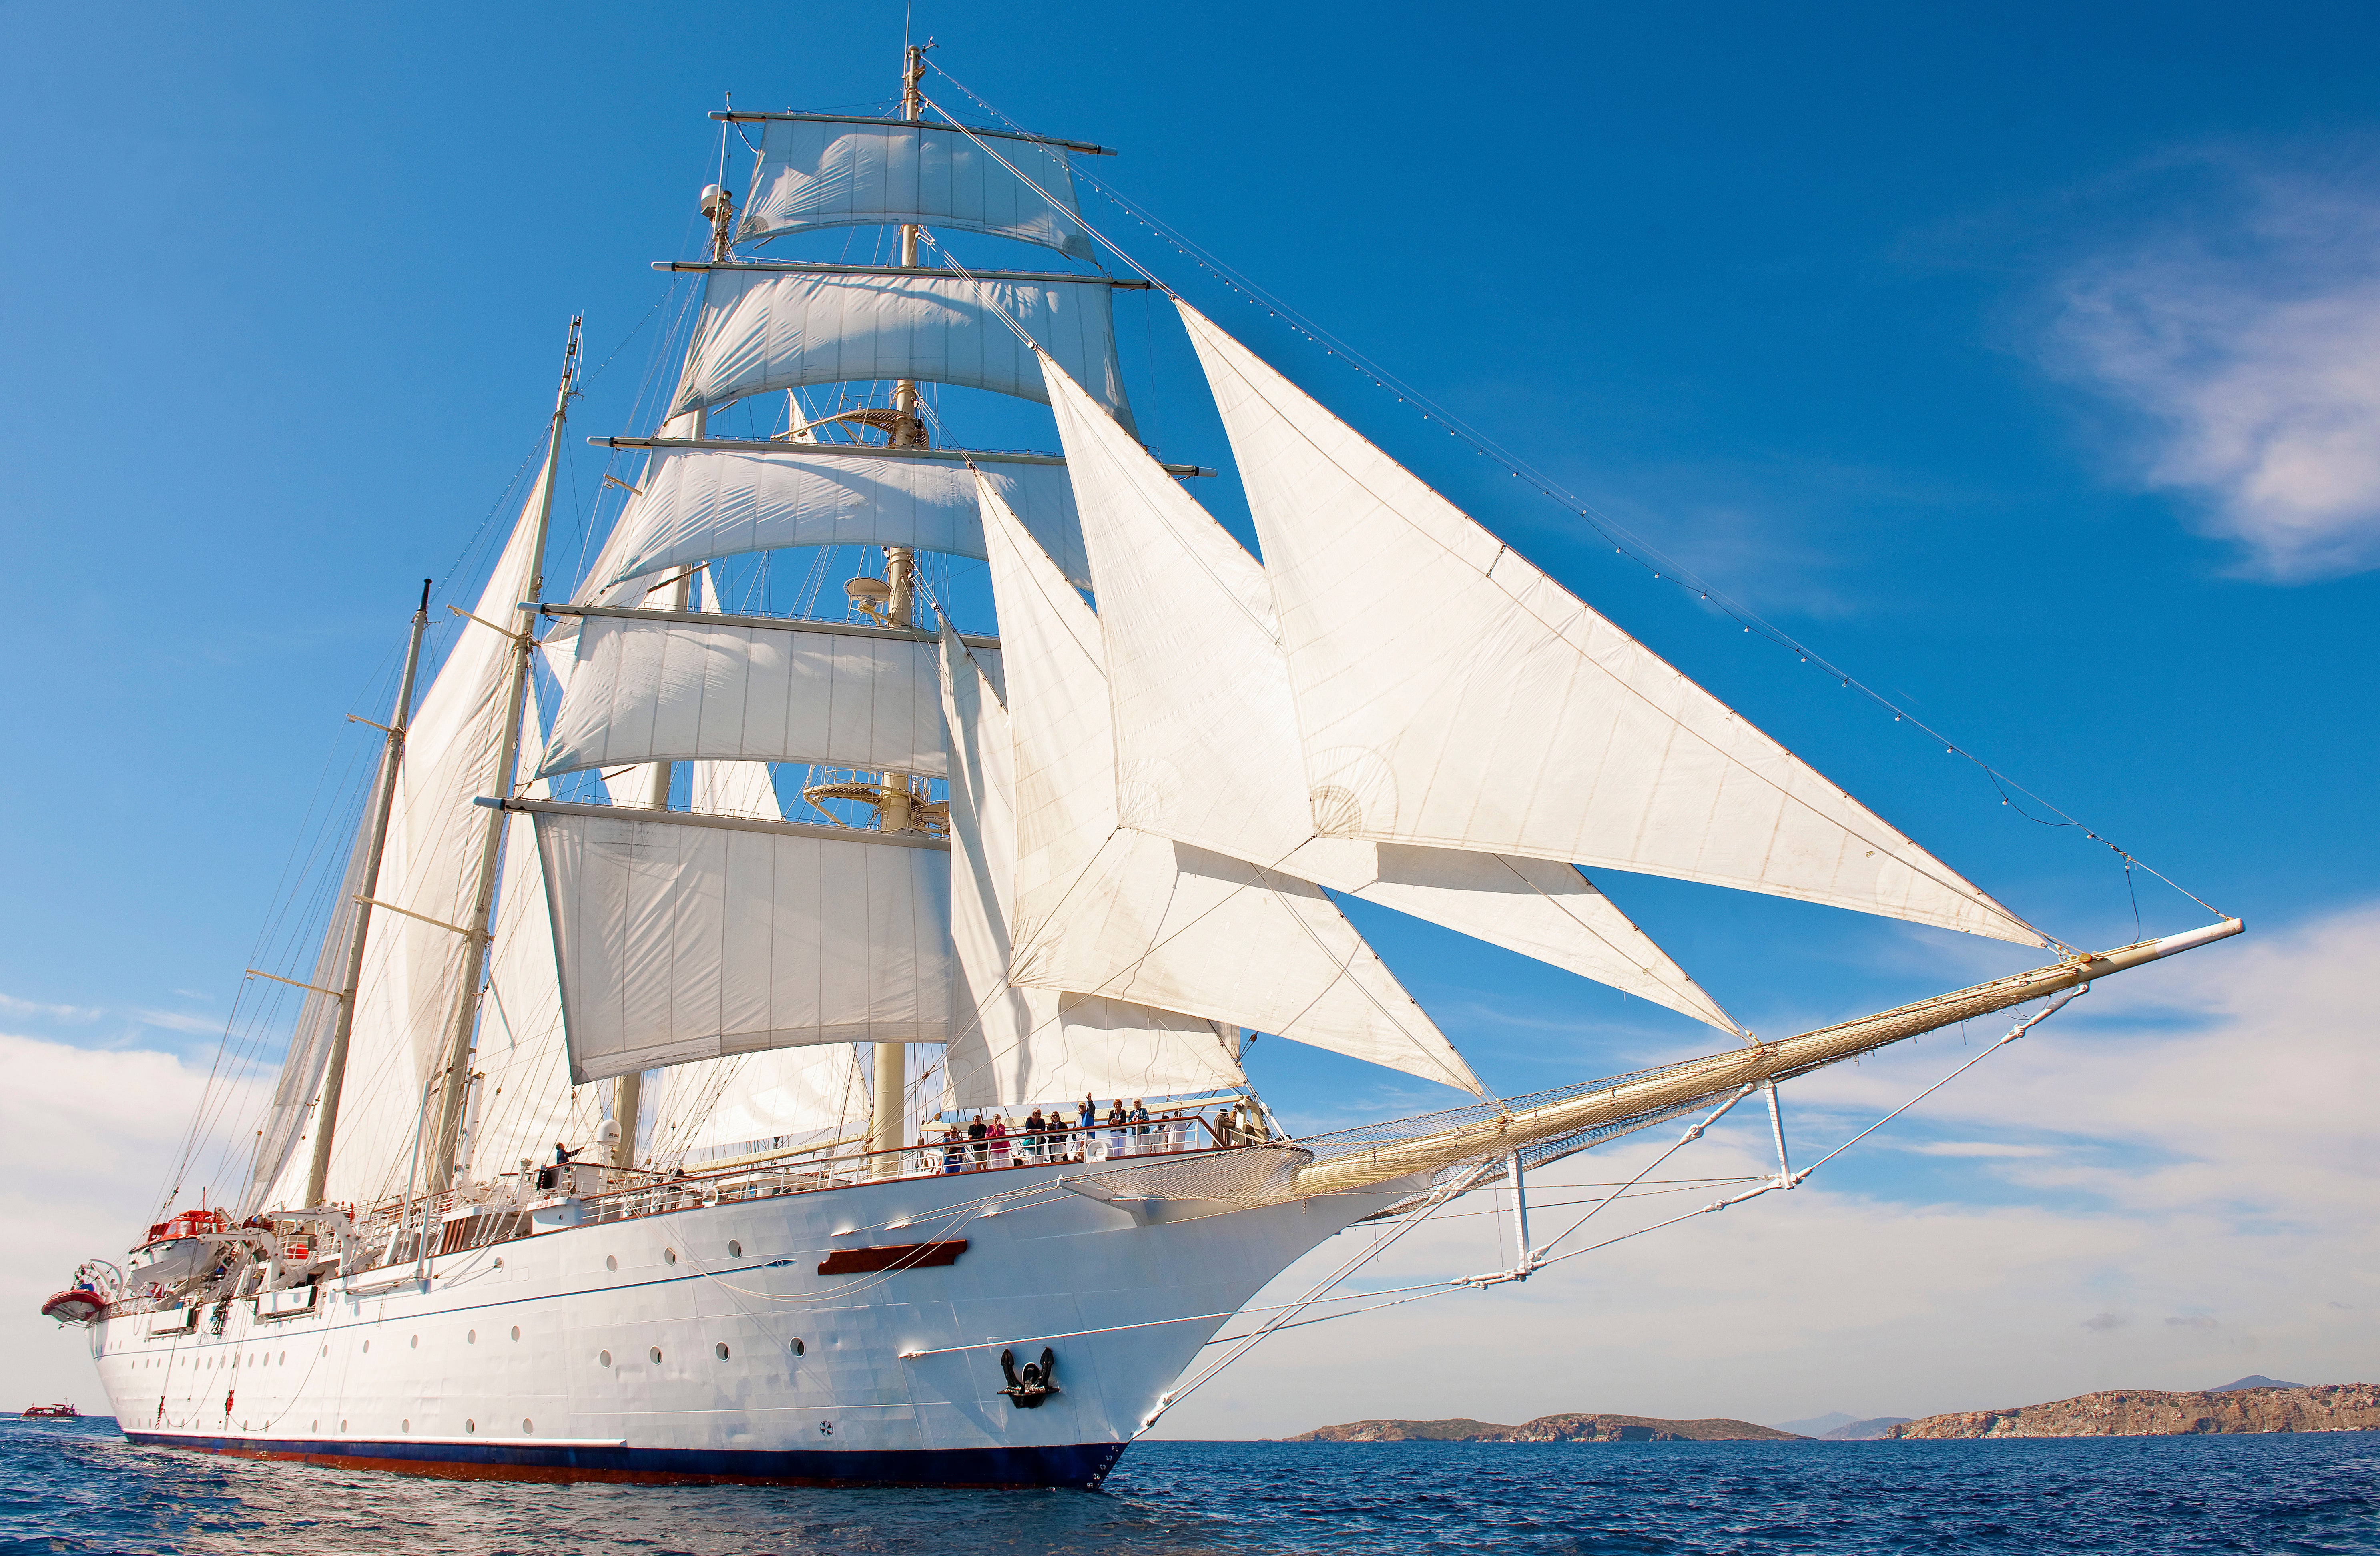 Find intimate cruising on the 115m Star Clipper ship that carries just 166 guests